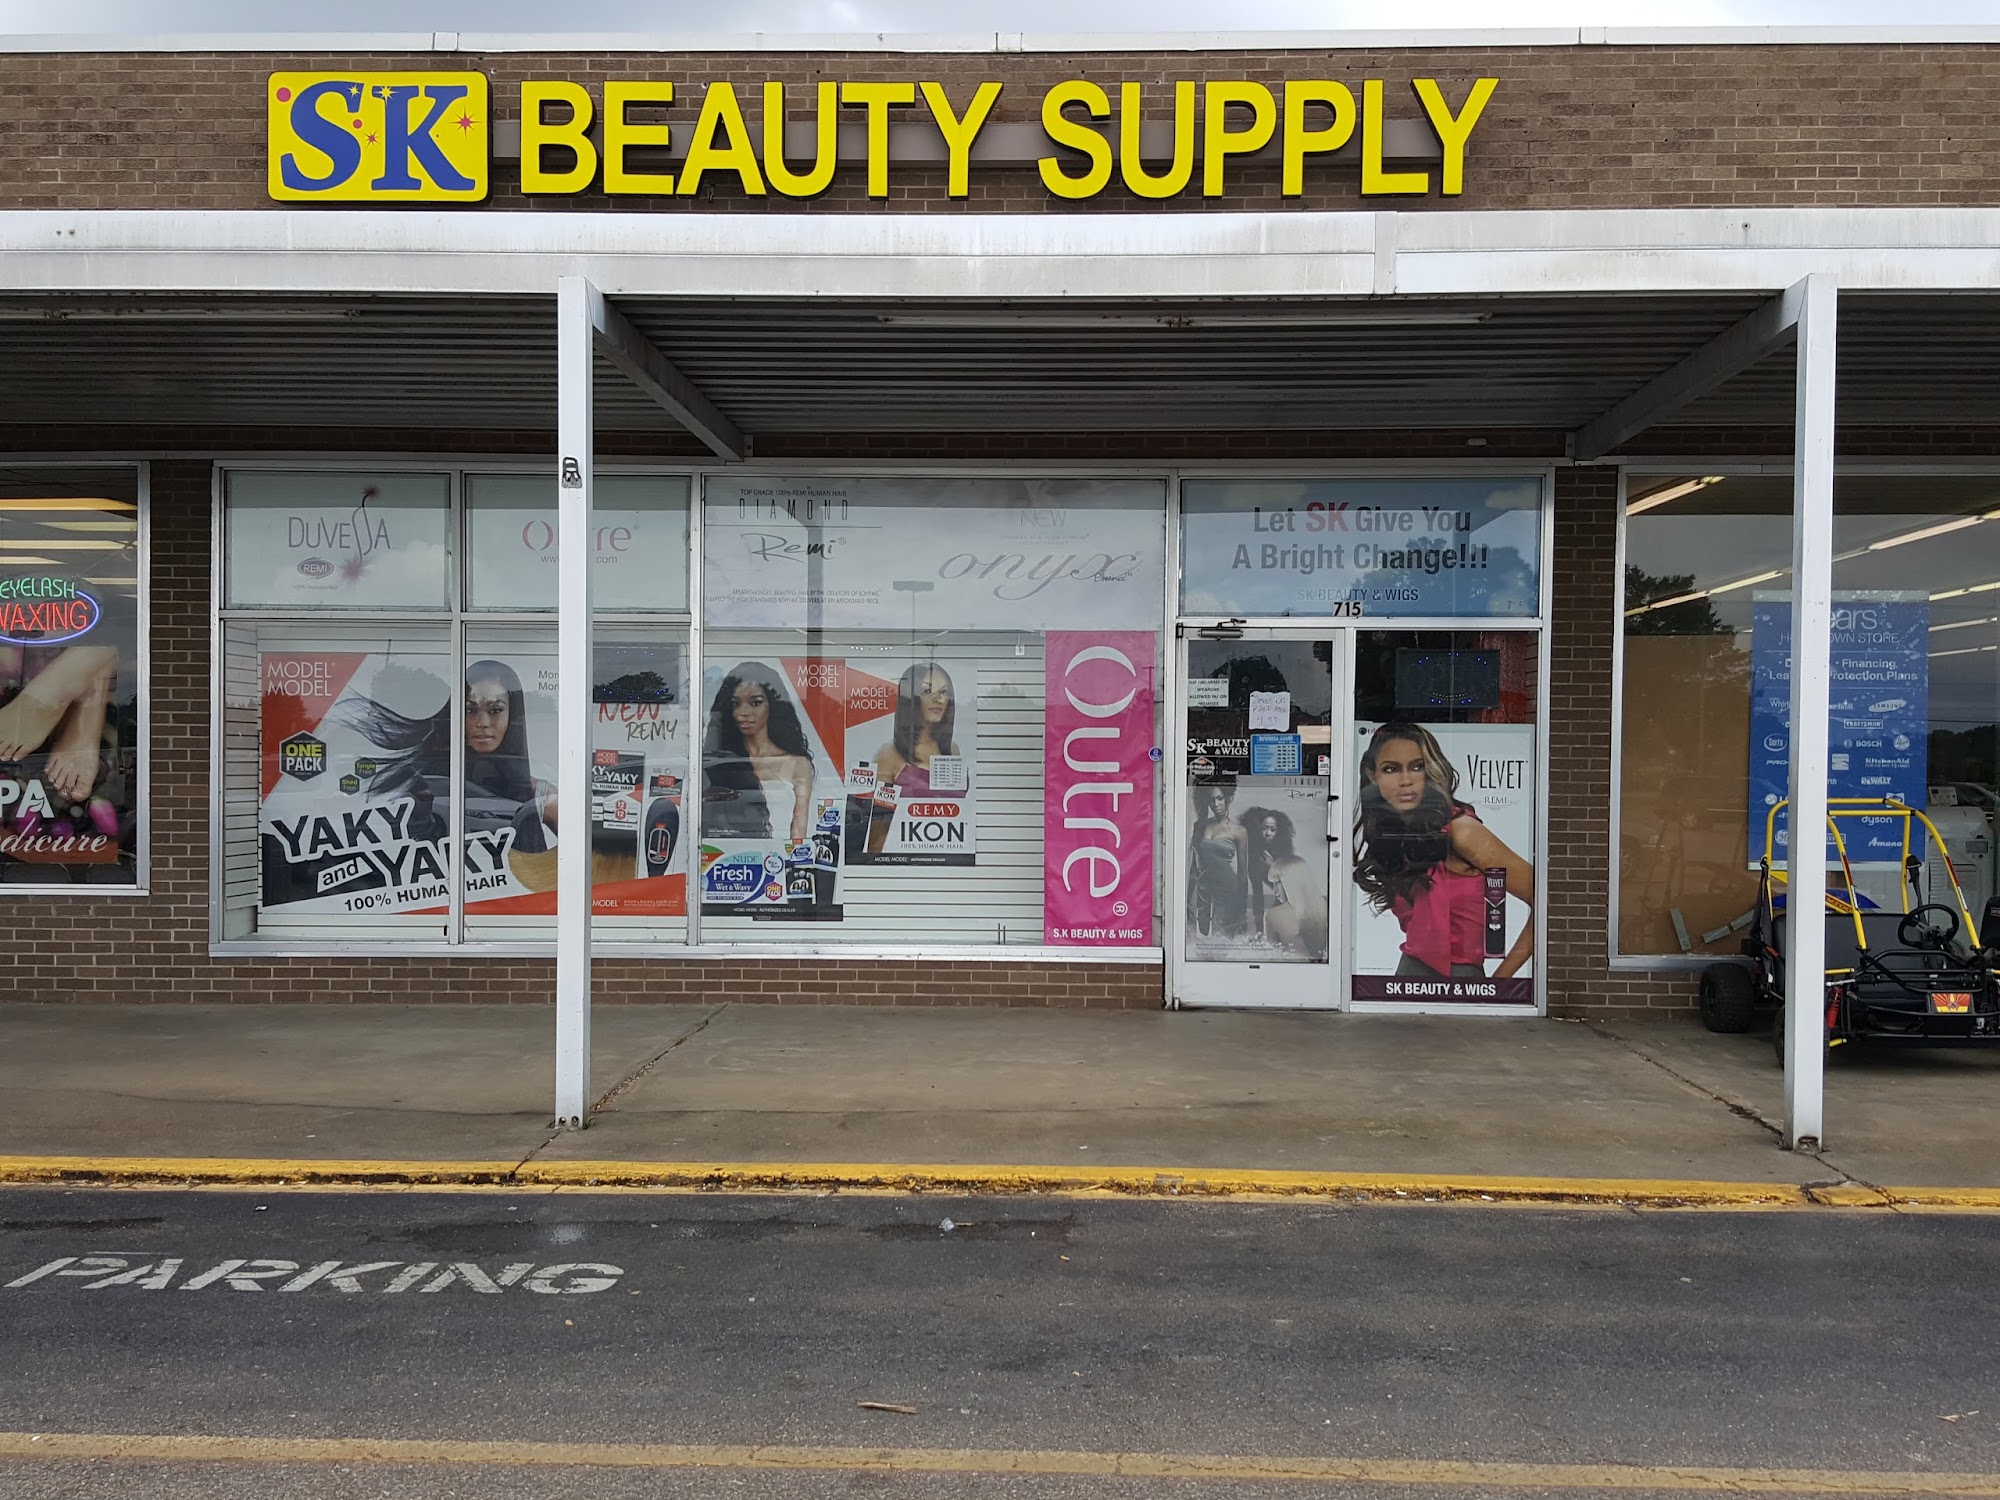 Sk Beauty & Wigs Greenwood 715 W Park Ave, Greenwood Mississippi 38930